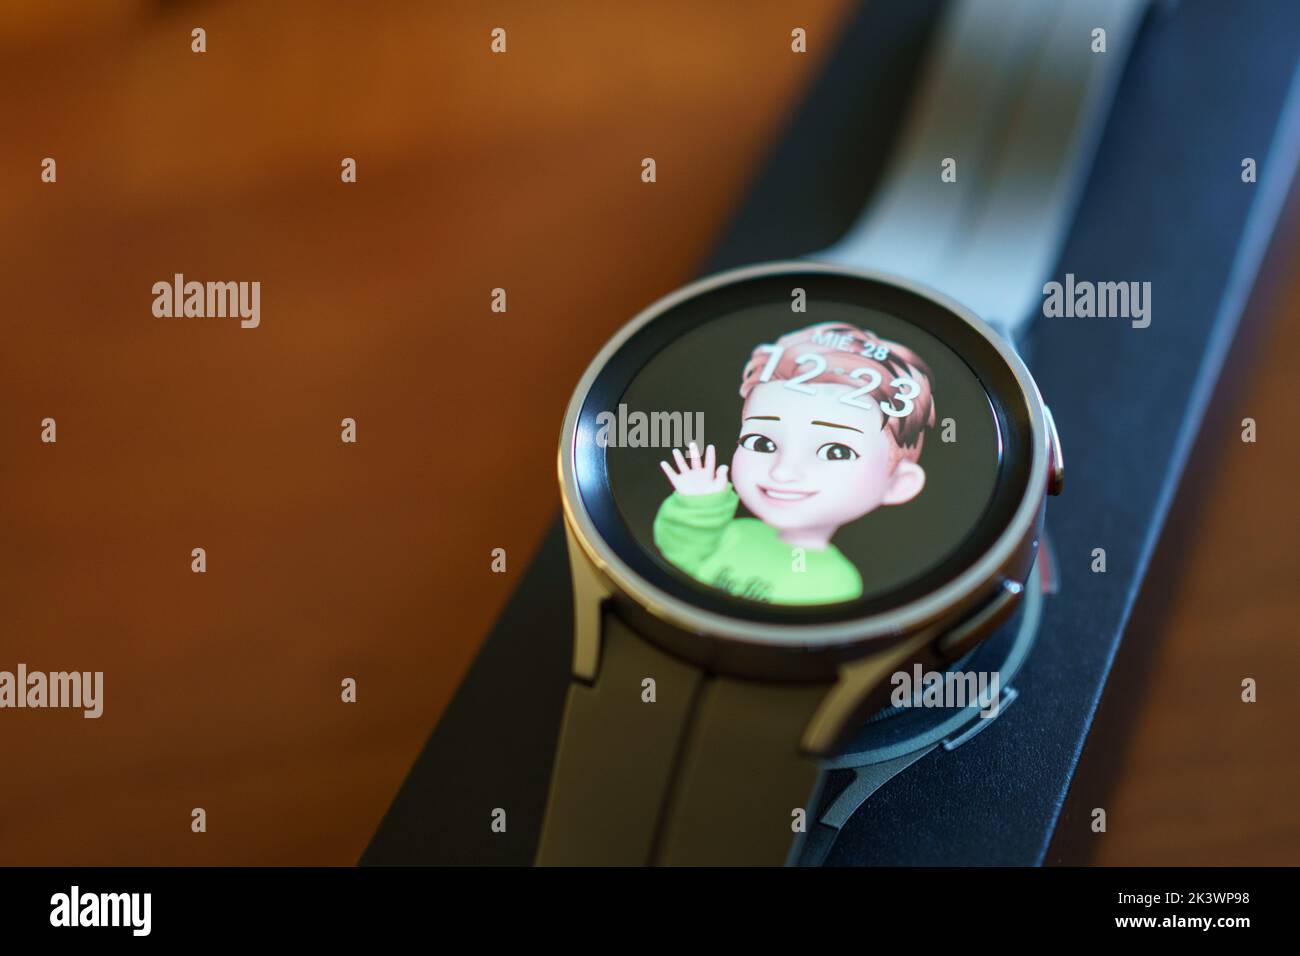 Granada, Andalusia, Spain - September 28, 2022: New Samsung Watch 5 Pro with watch face of AR Emoji Stock Photo